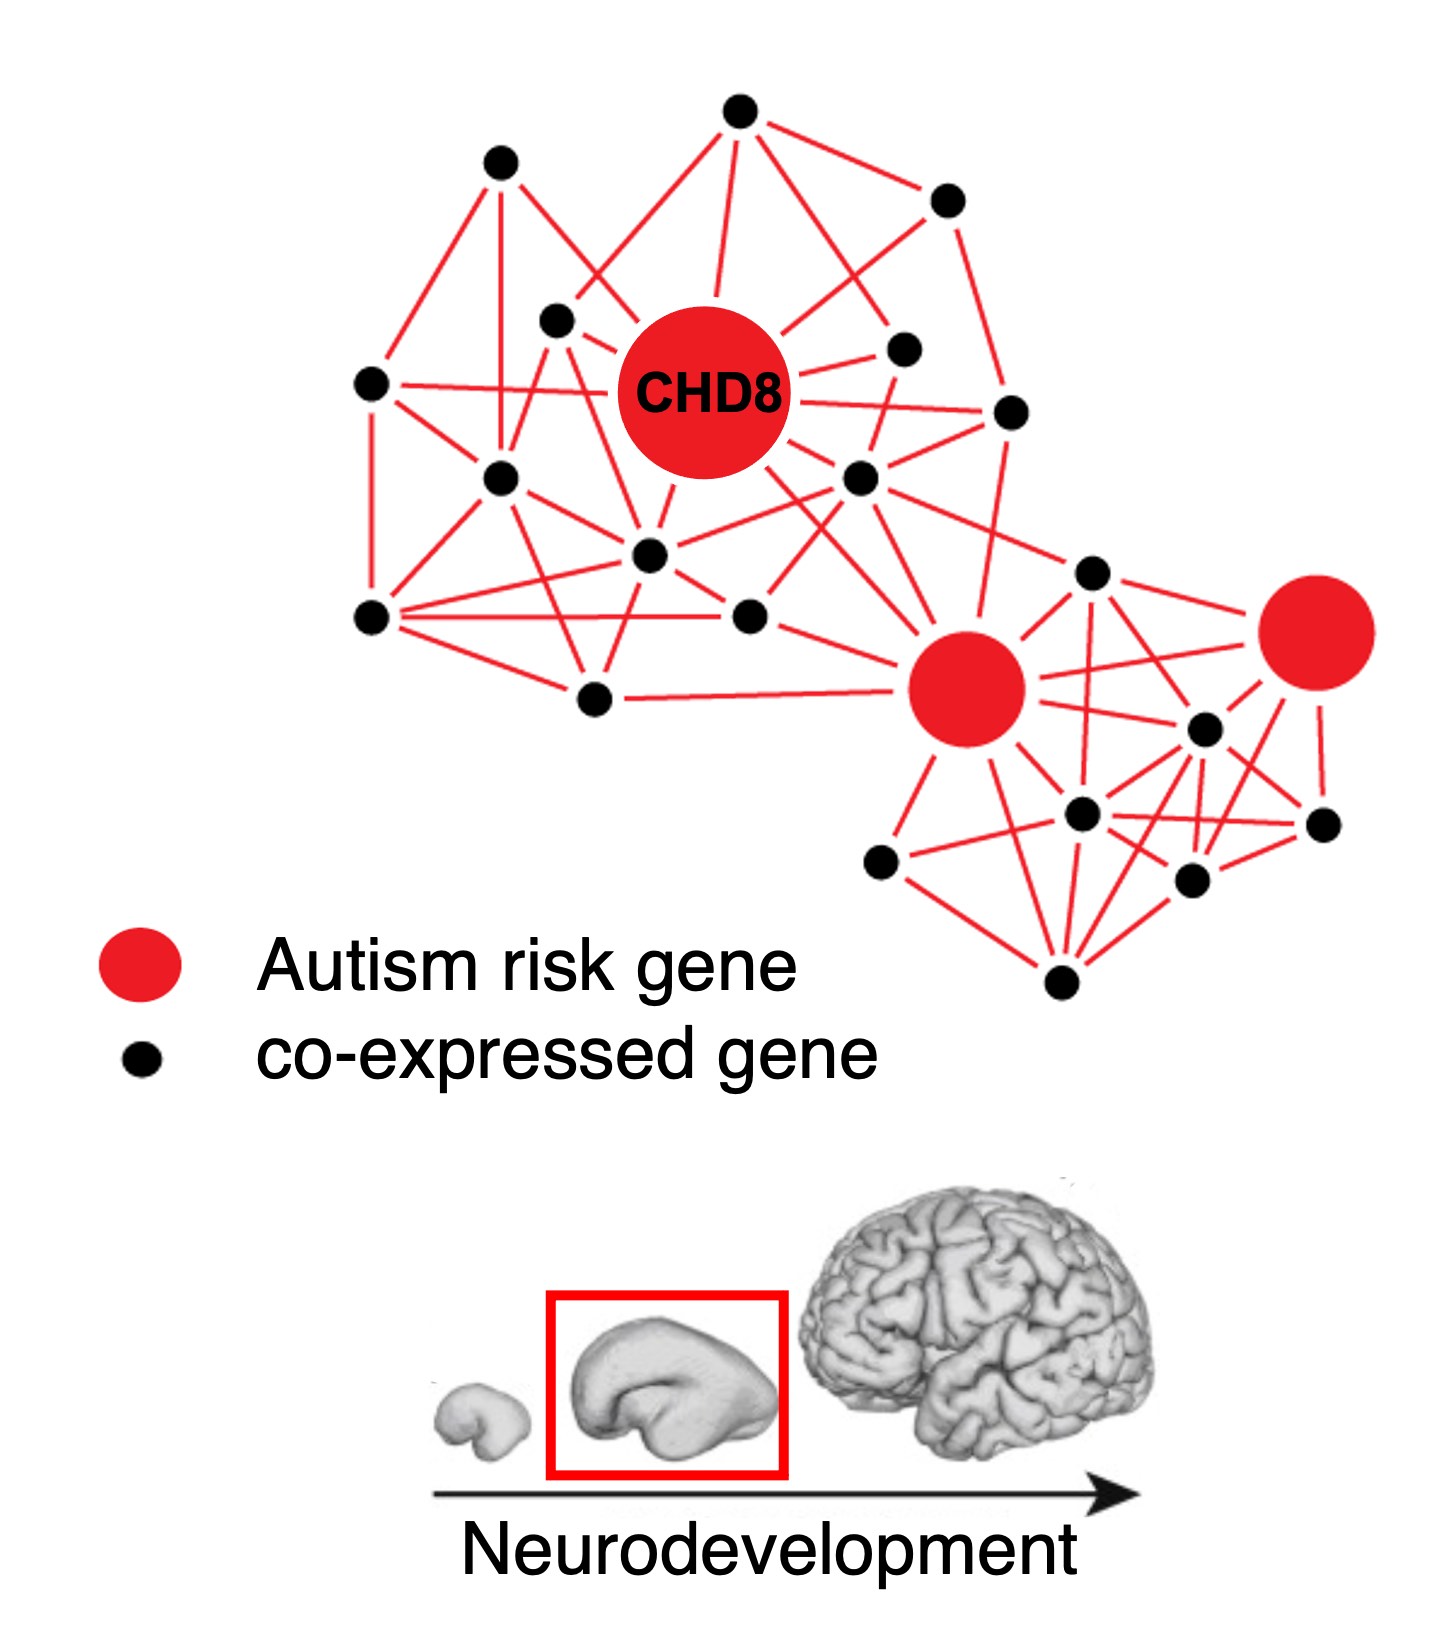 figure
                        illustrating how CHD8, during neurodevelopment, regulates the expression of other
                        genes that are co-expressed in networks that are also associated with likelihood of autism.